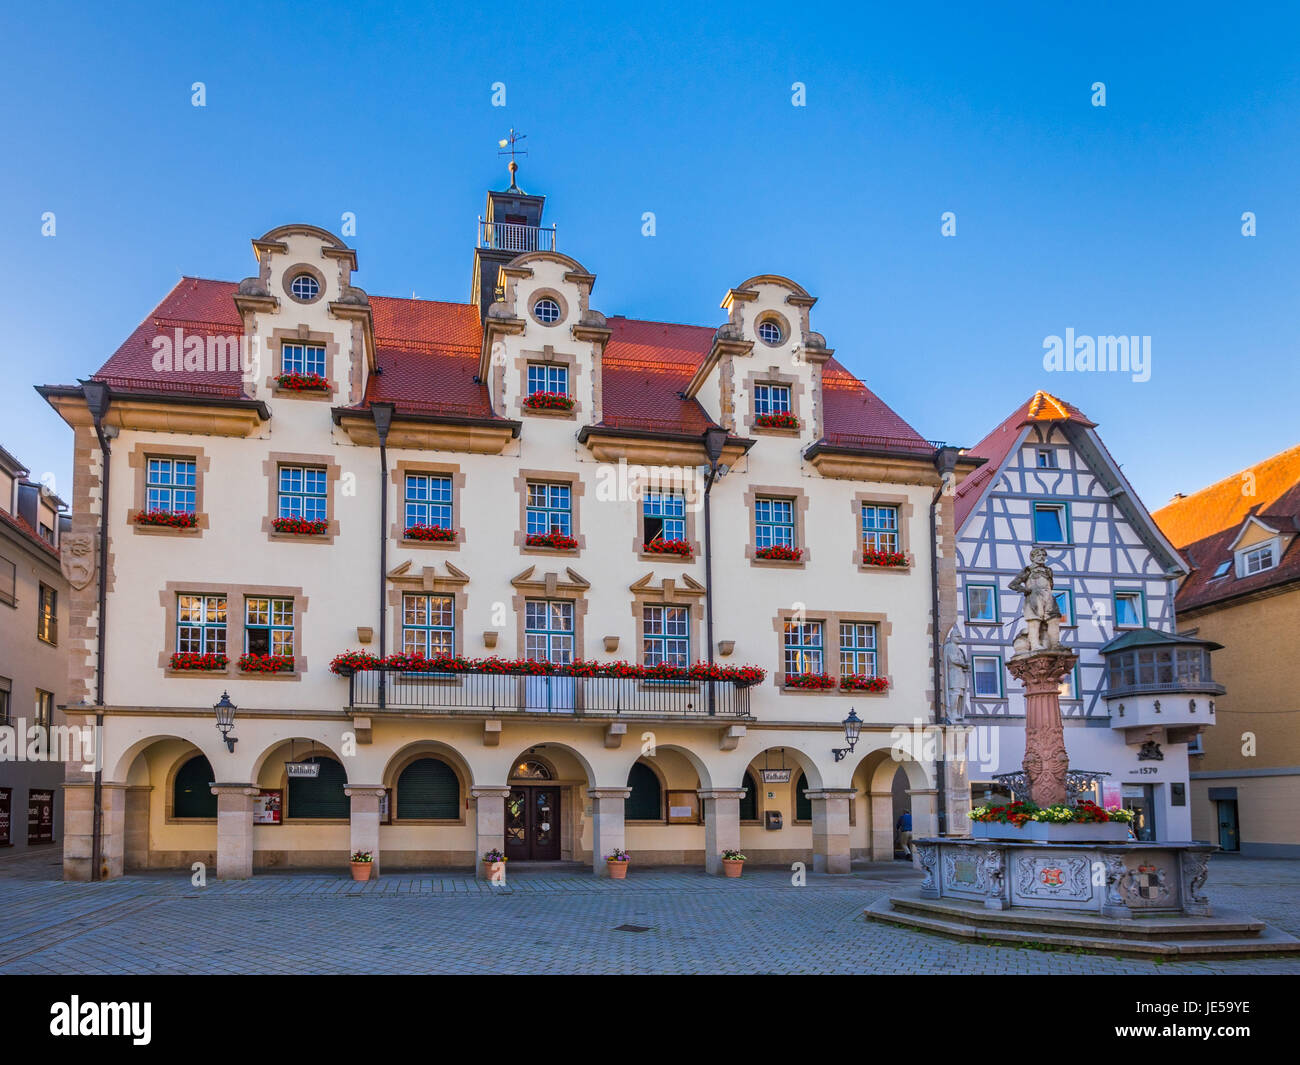 City hall and market fountain at the historic centre, Sigmaringen, Baden-Württemberg, Germany, Europe Stock Photo